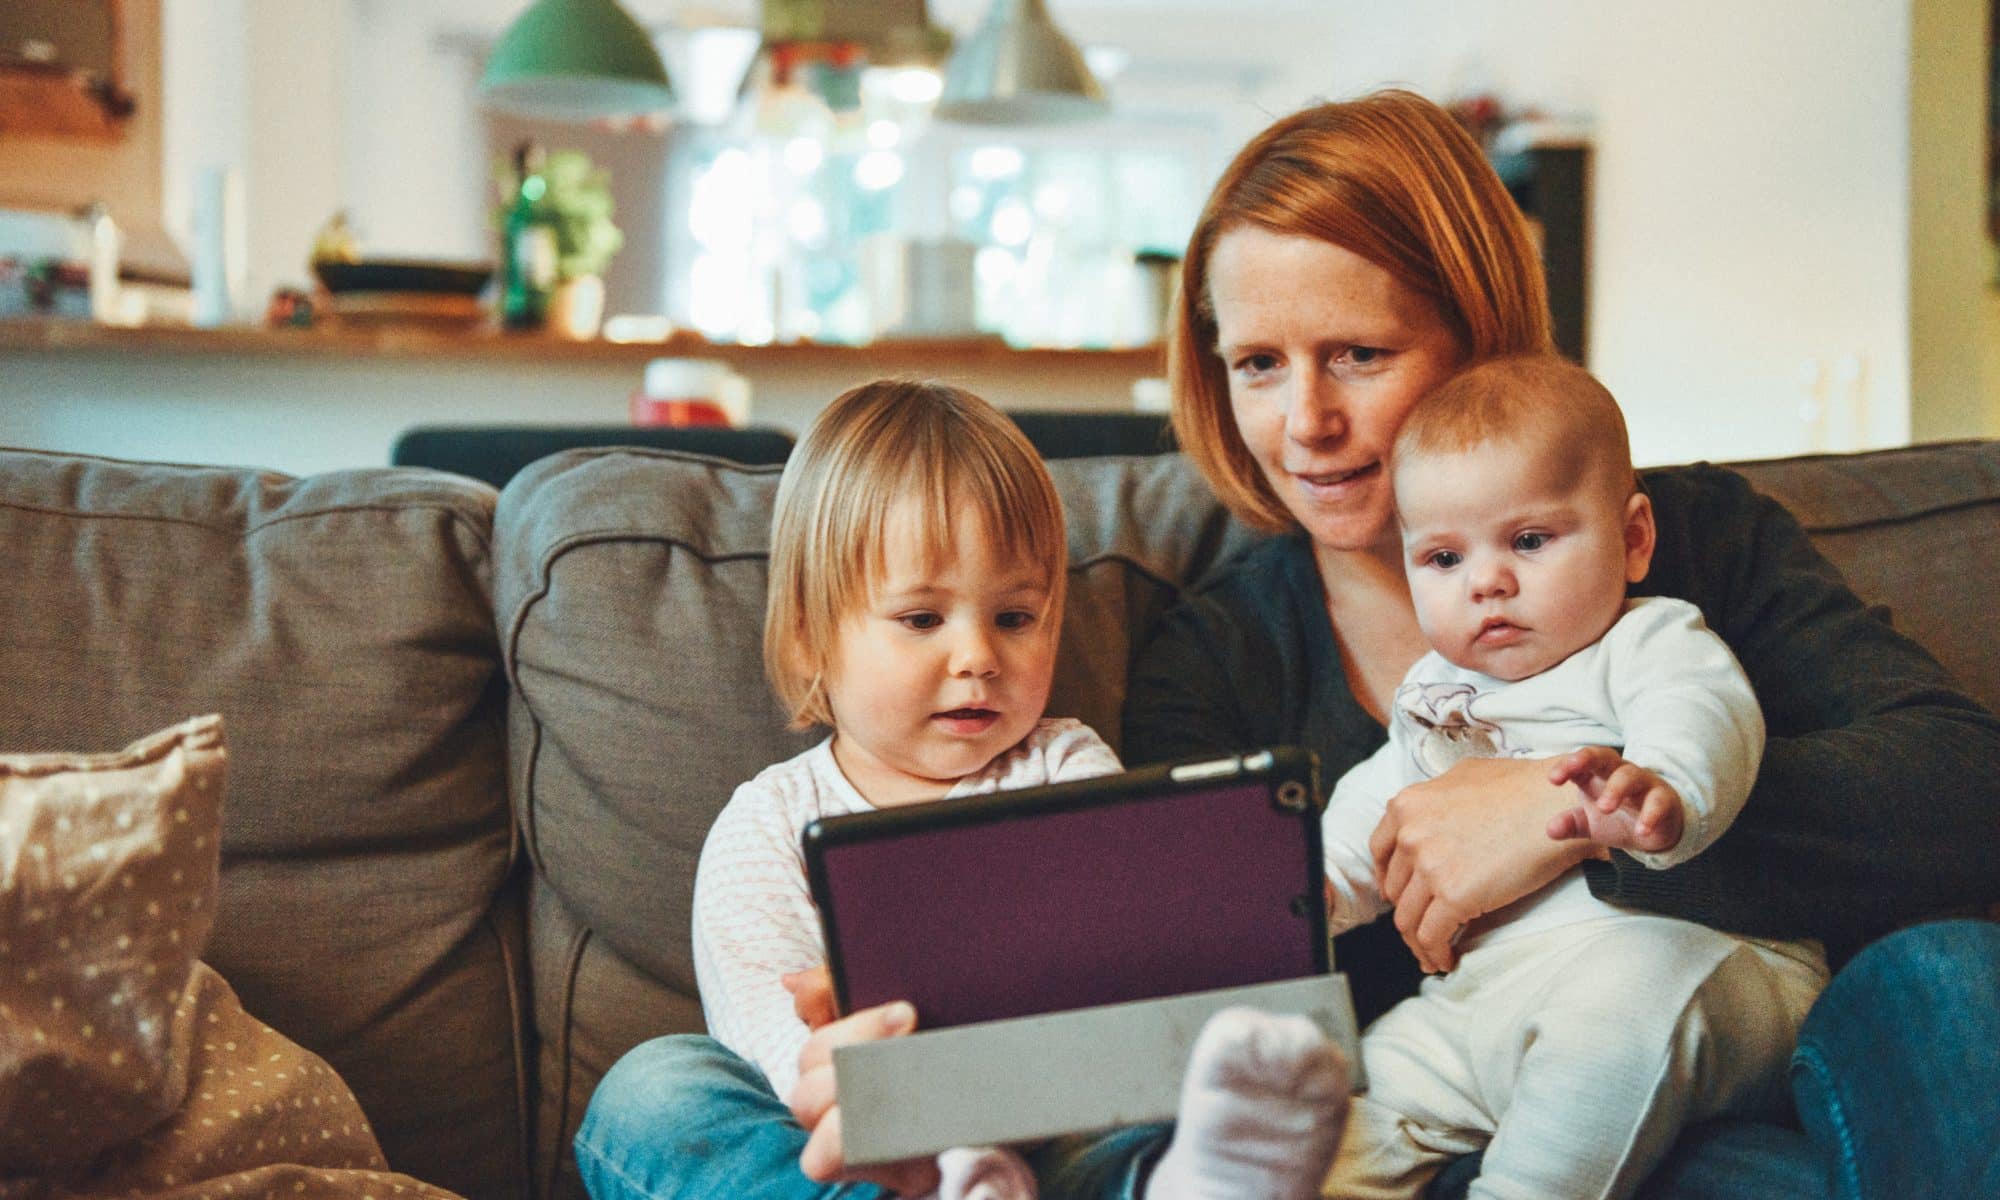 A woman and two babies playing with a tablet